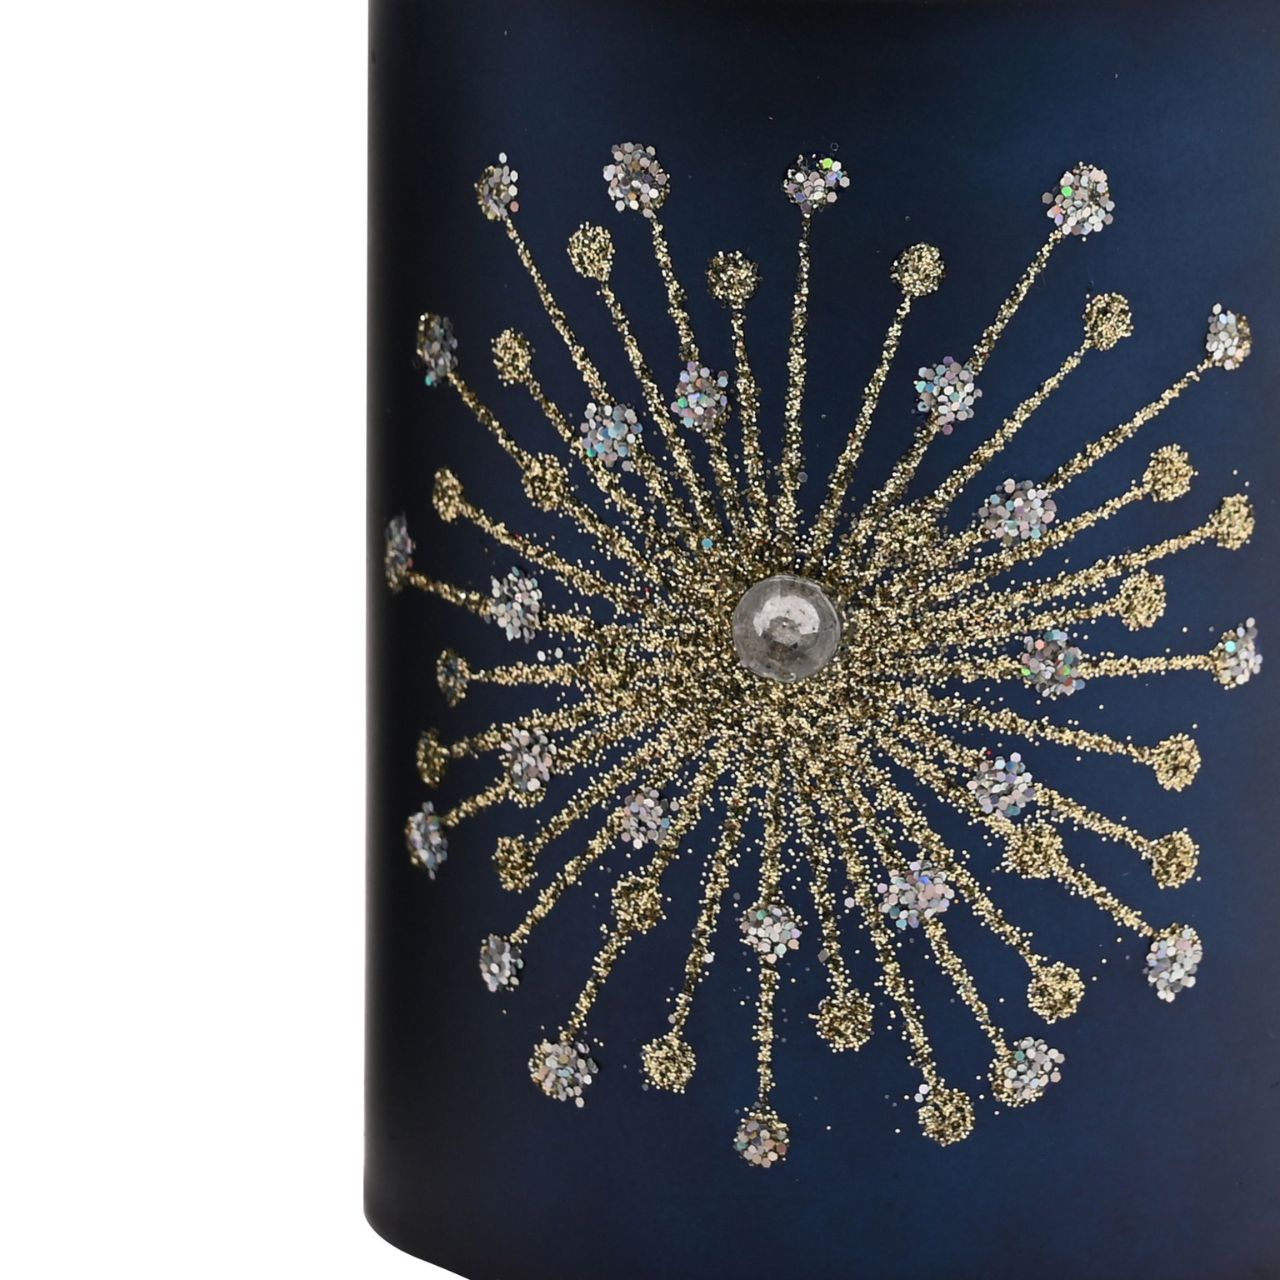 Celestial Starburst Pillar Christmas Candle  Starburst celestial pillar candle by THE SEASONAL GIFT CO®.  These glistening candles will help to create a magical Winter Wonderland at home this festive period.